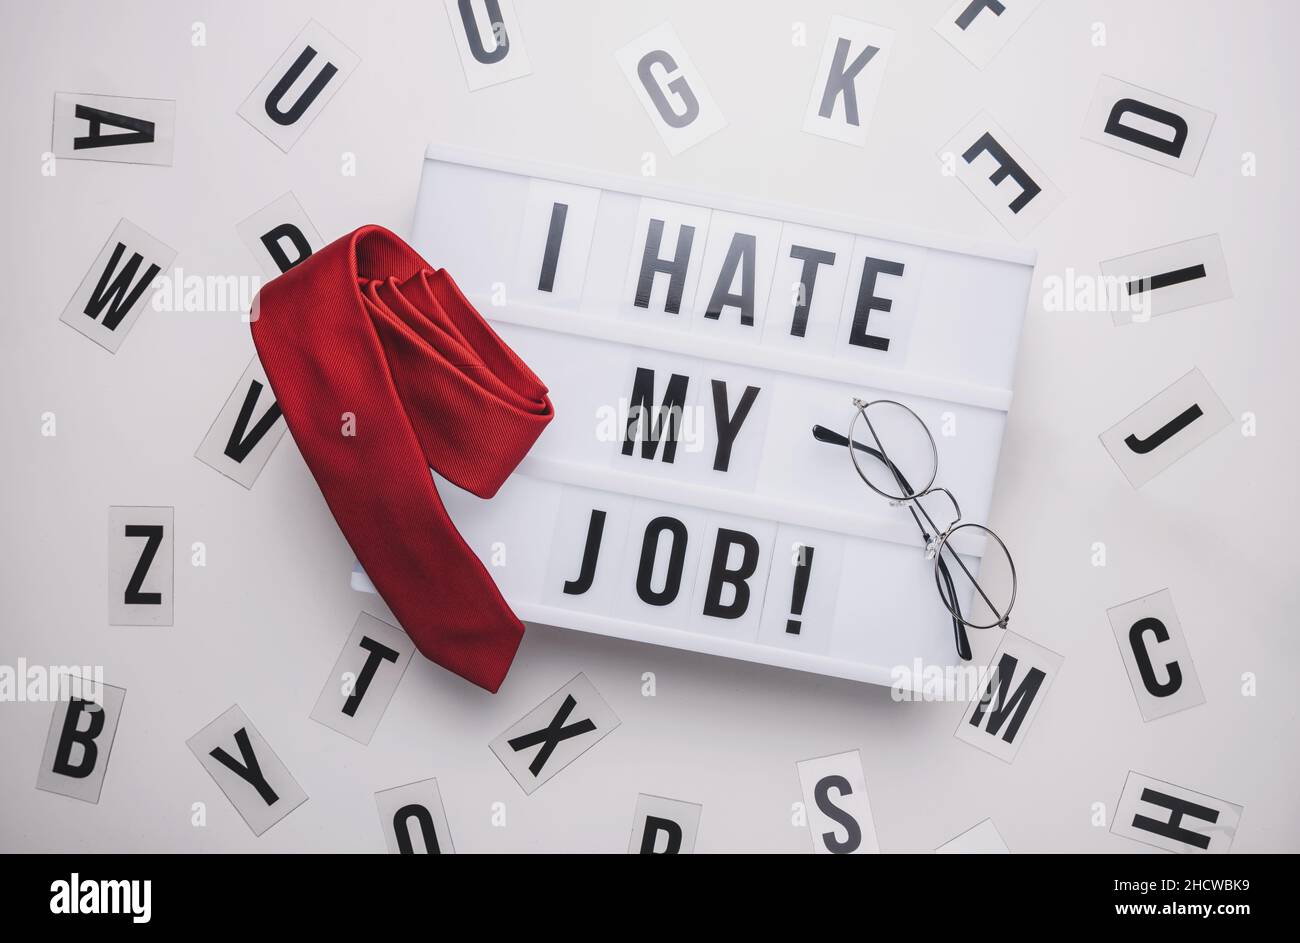 Lightbox with words I Hate My Job and office glasses with red tie, business concept image Stock Photo